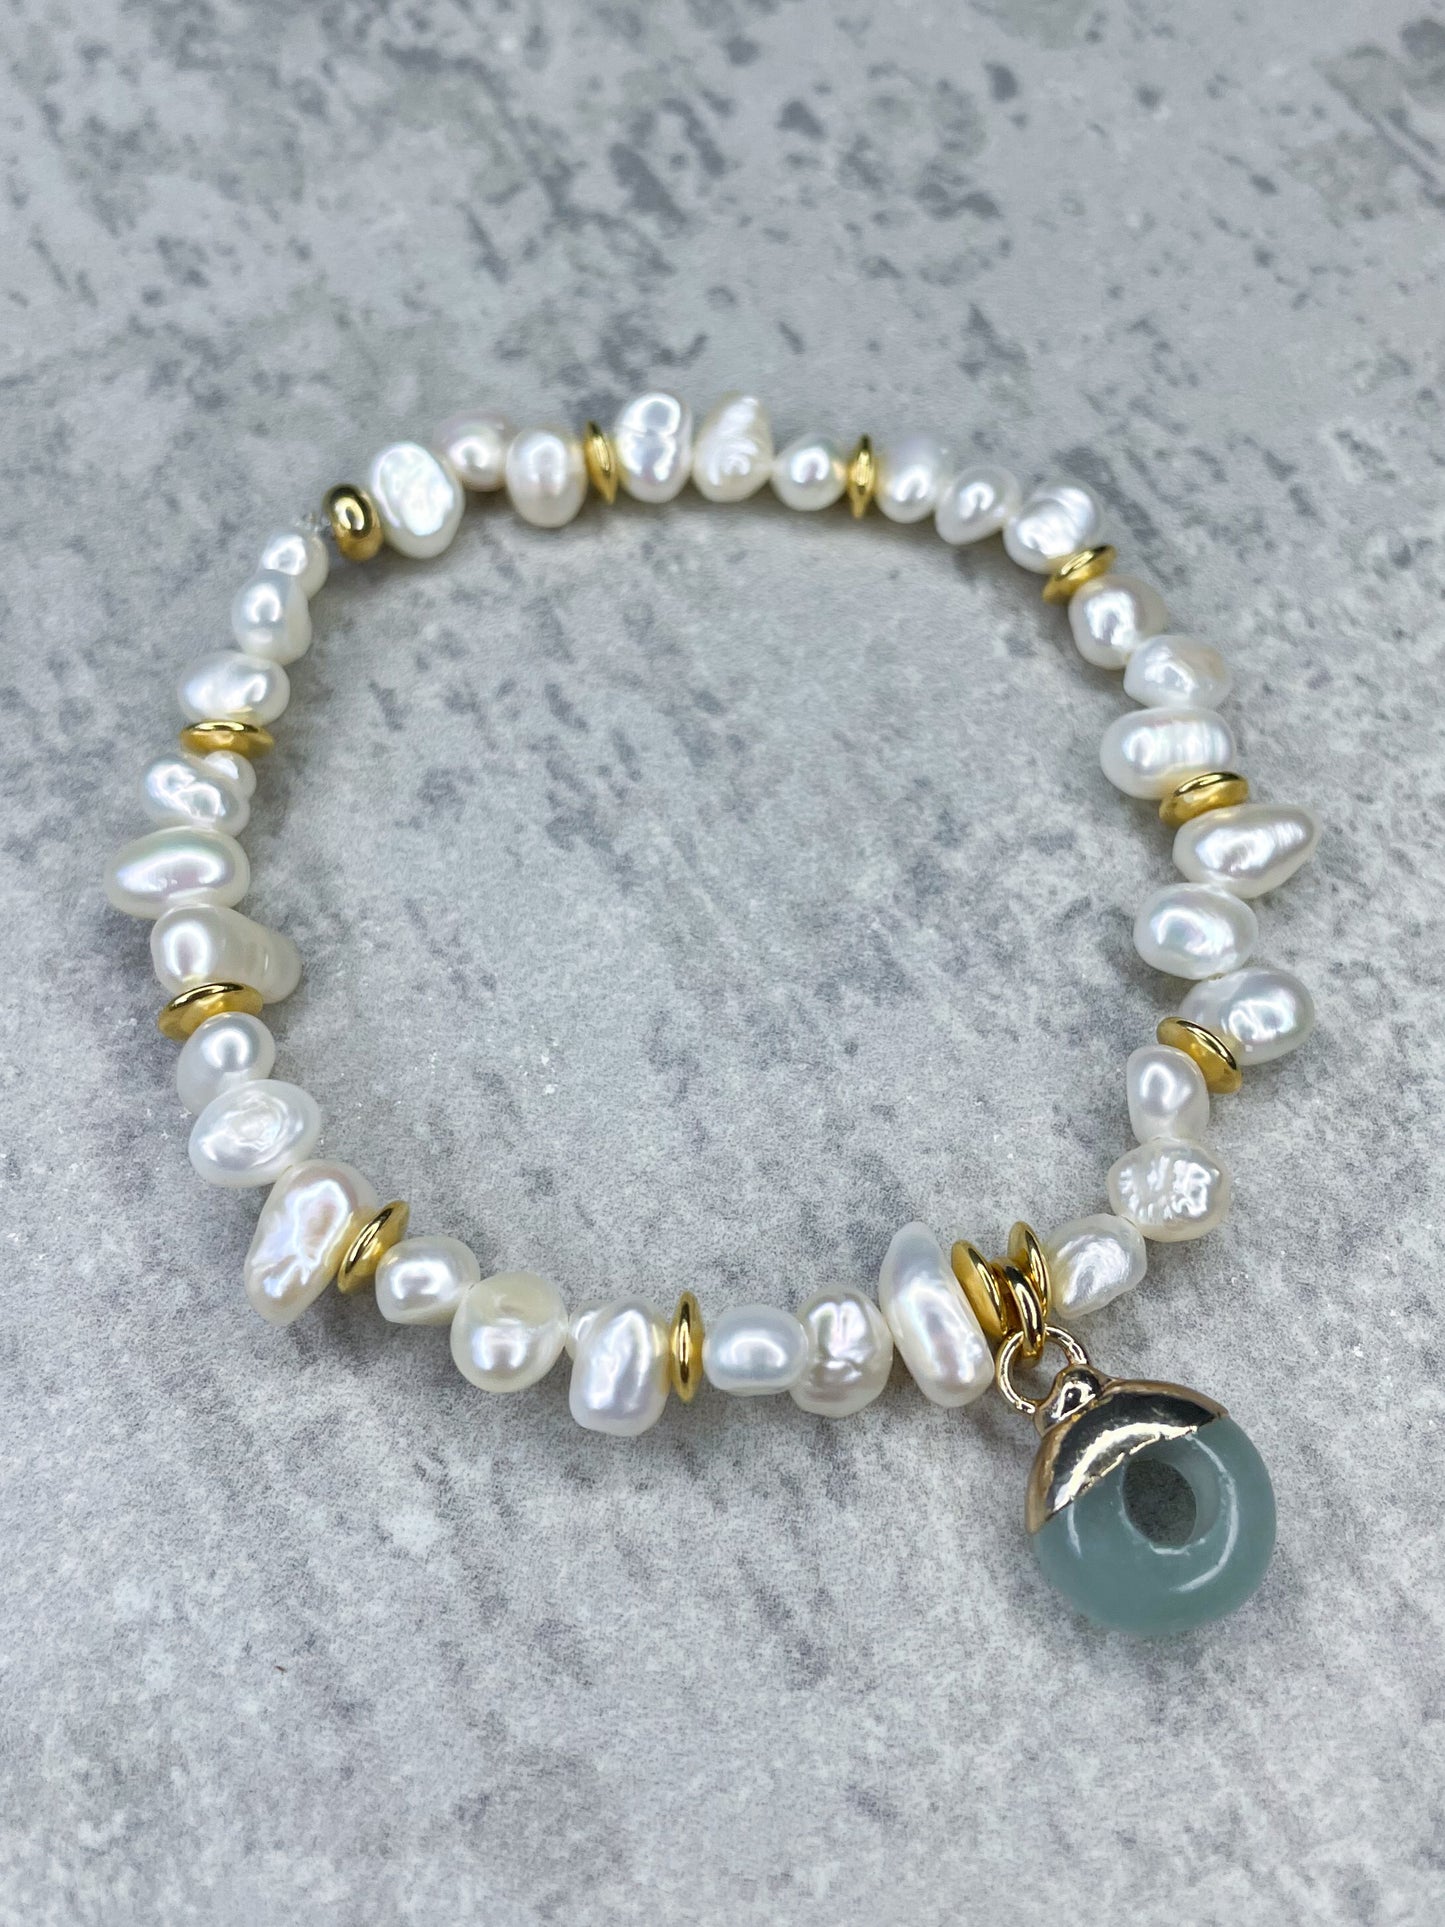 Freshwater pearl bracelet with pendant